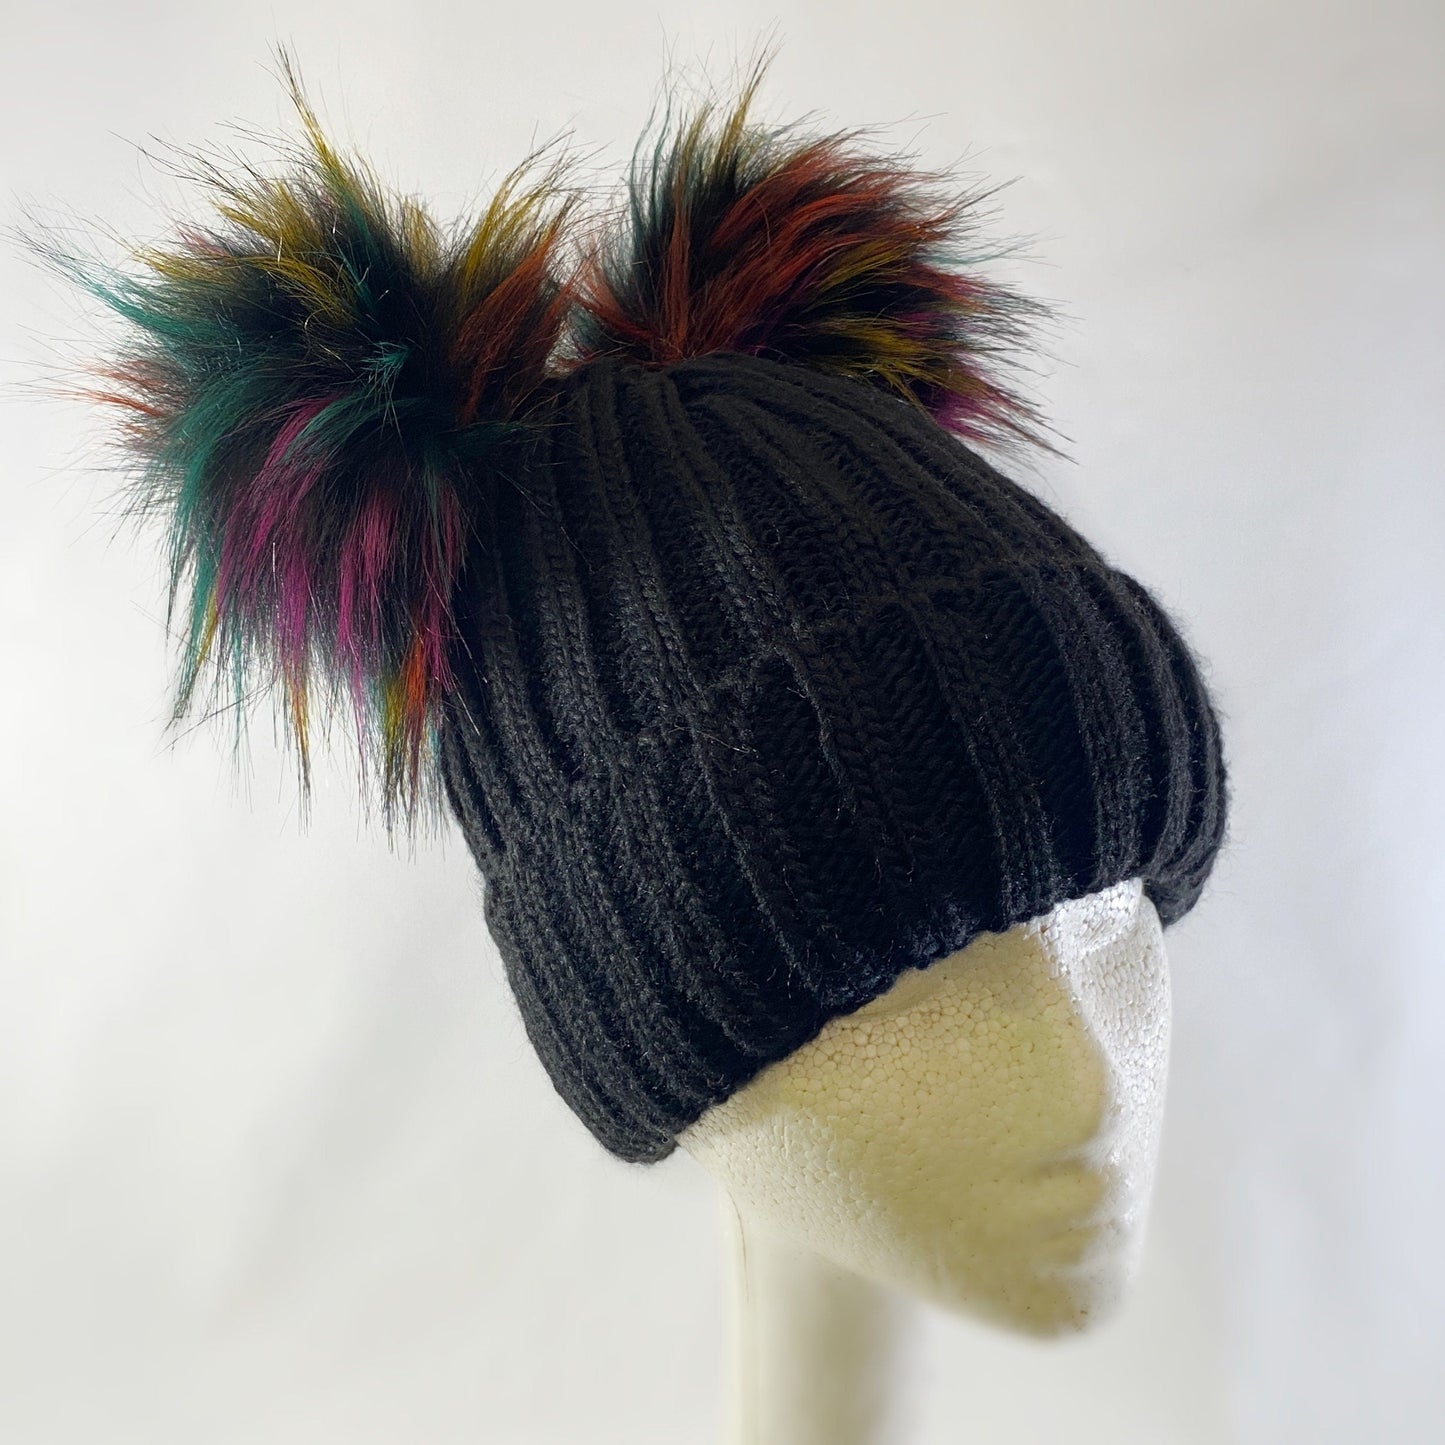 Black Winter Beanie With Dual Multicolor Pompoms - Made From Italian Wool, Acrylic Yarn, and Faux Fur